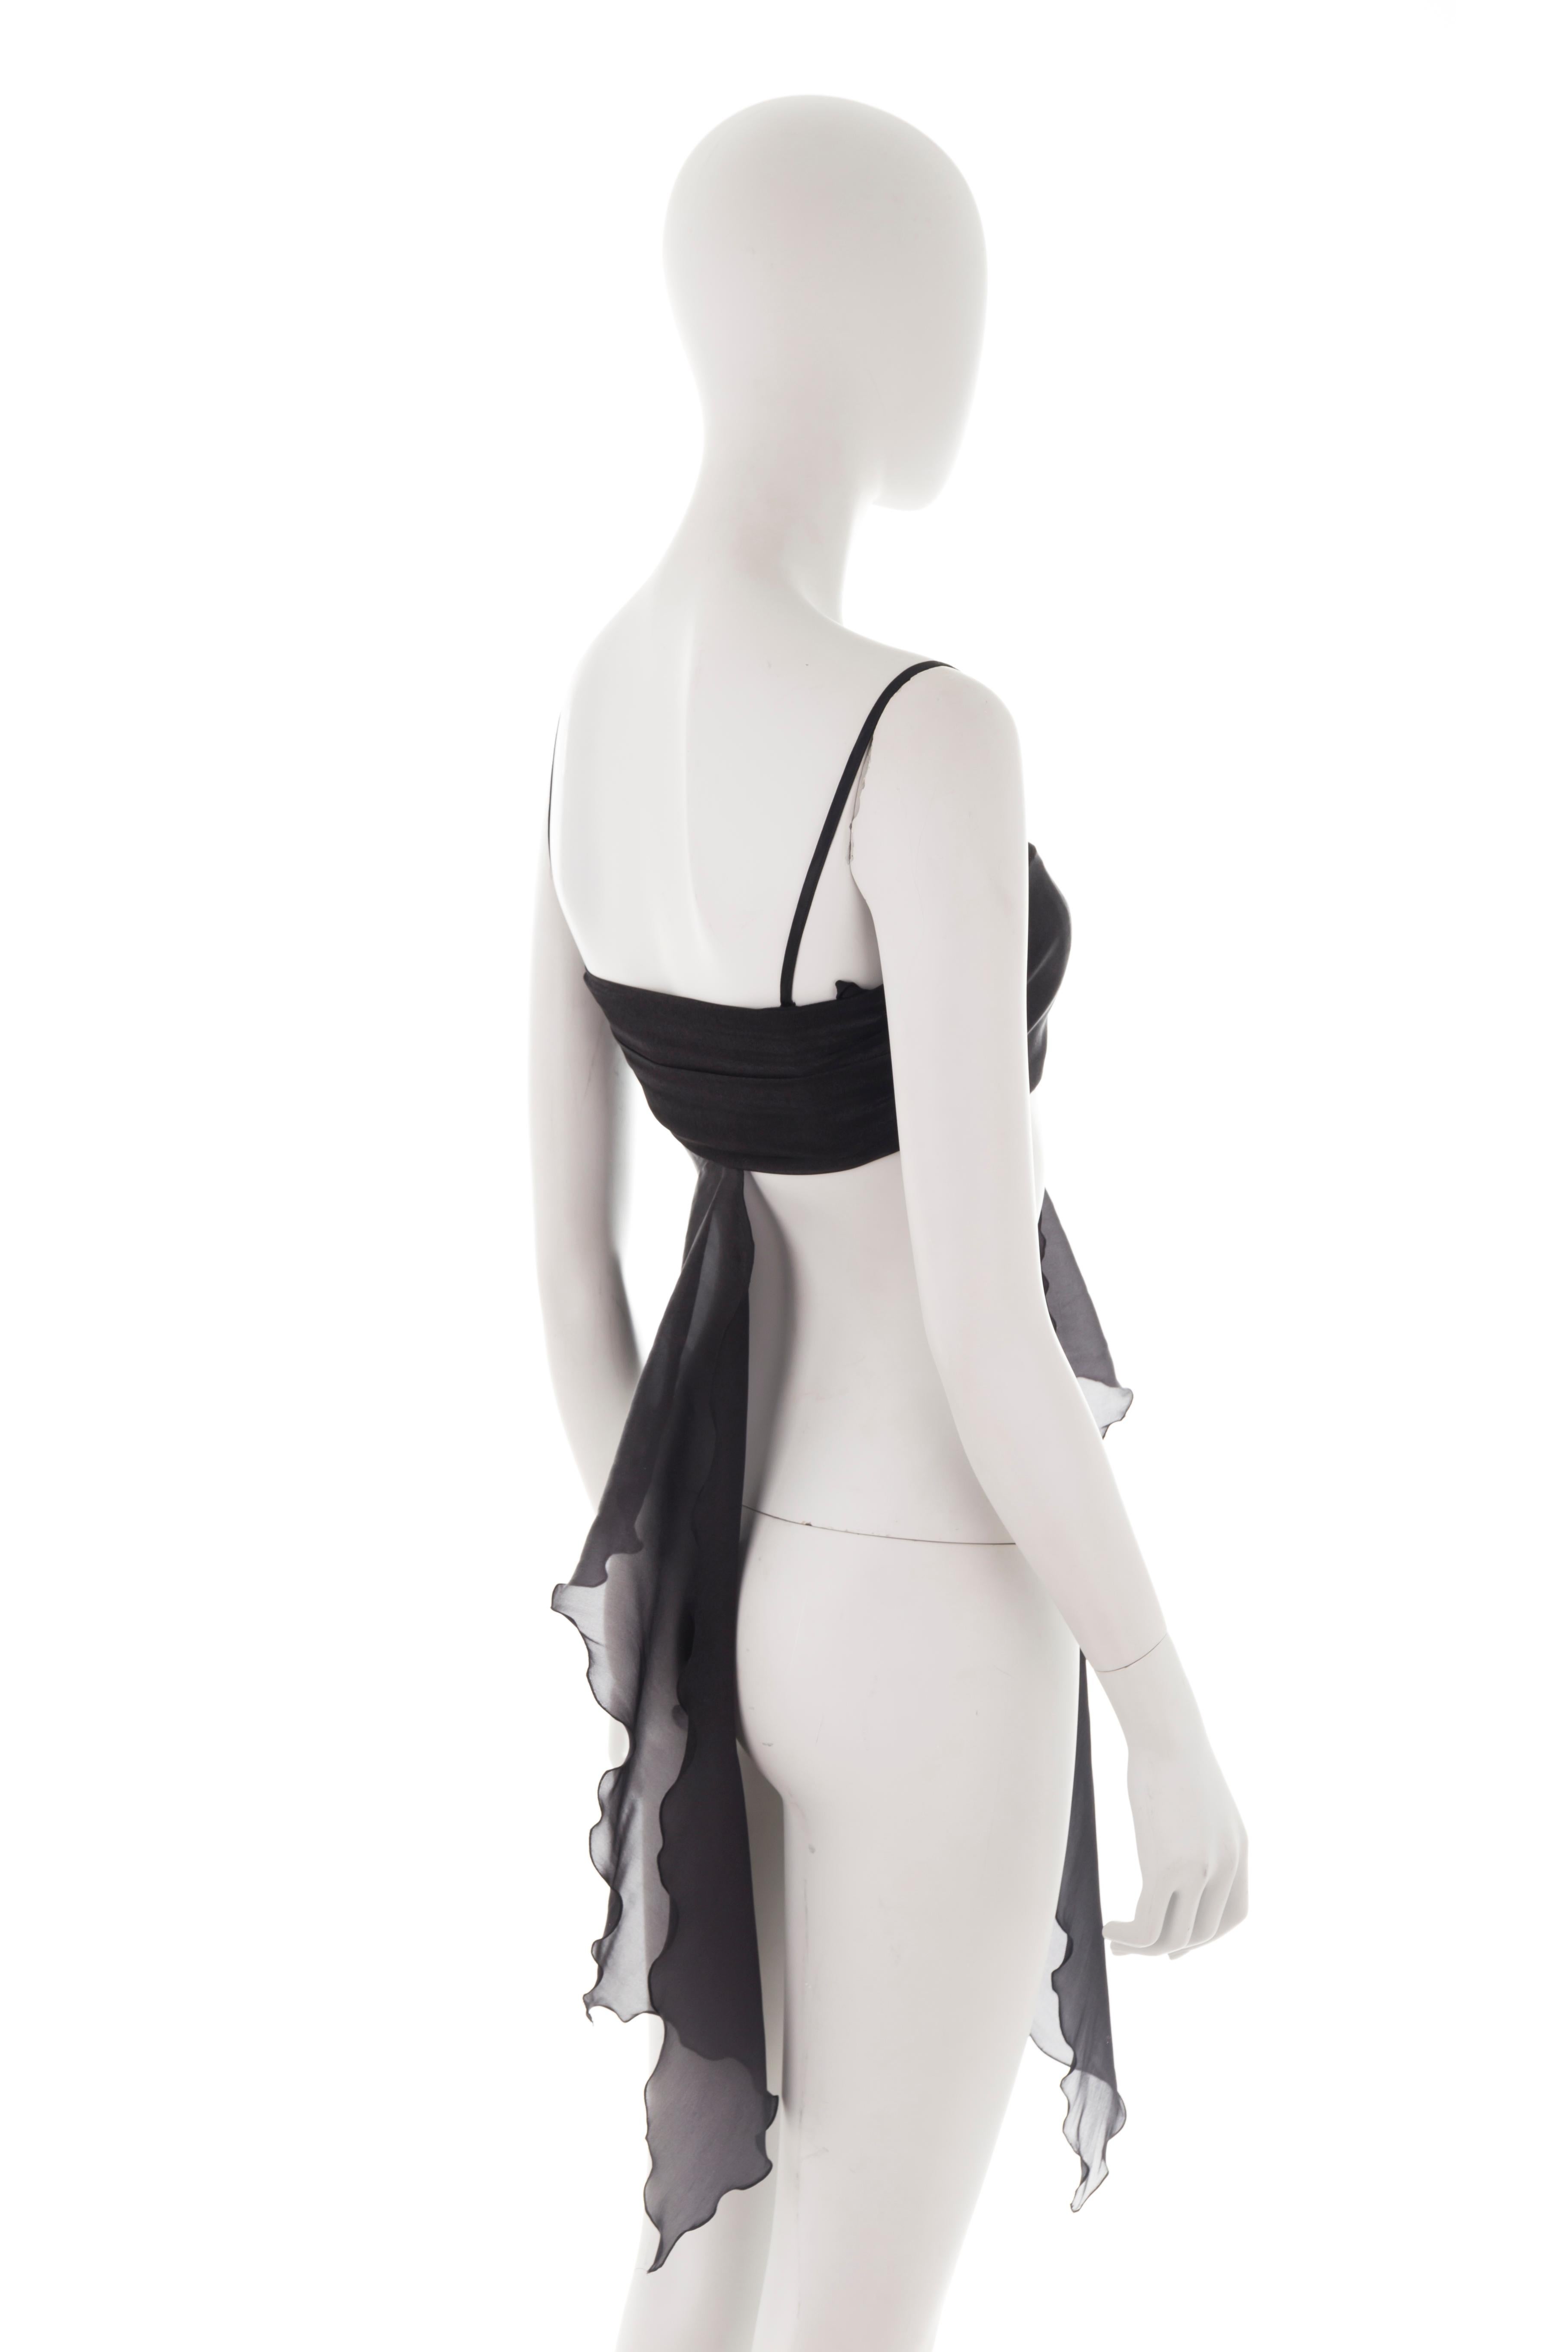 Emporio Armani S/S 2001 ruffled black tube top In Excellent Condition For Sale In Rome, IT